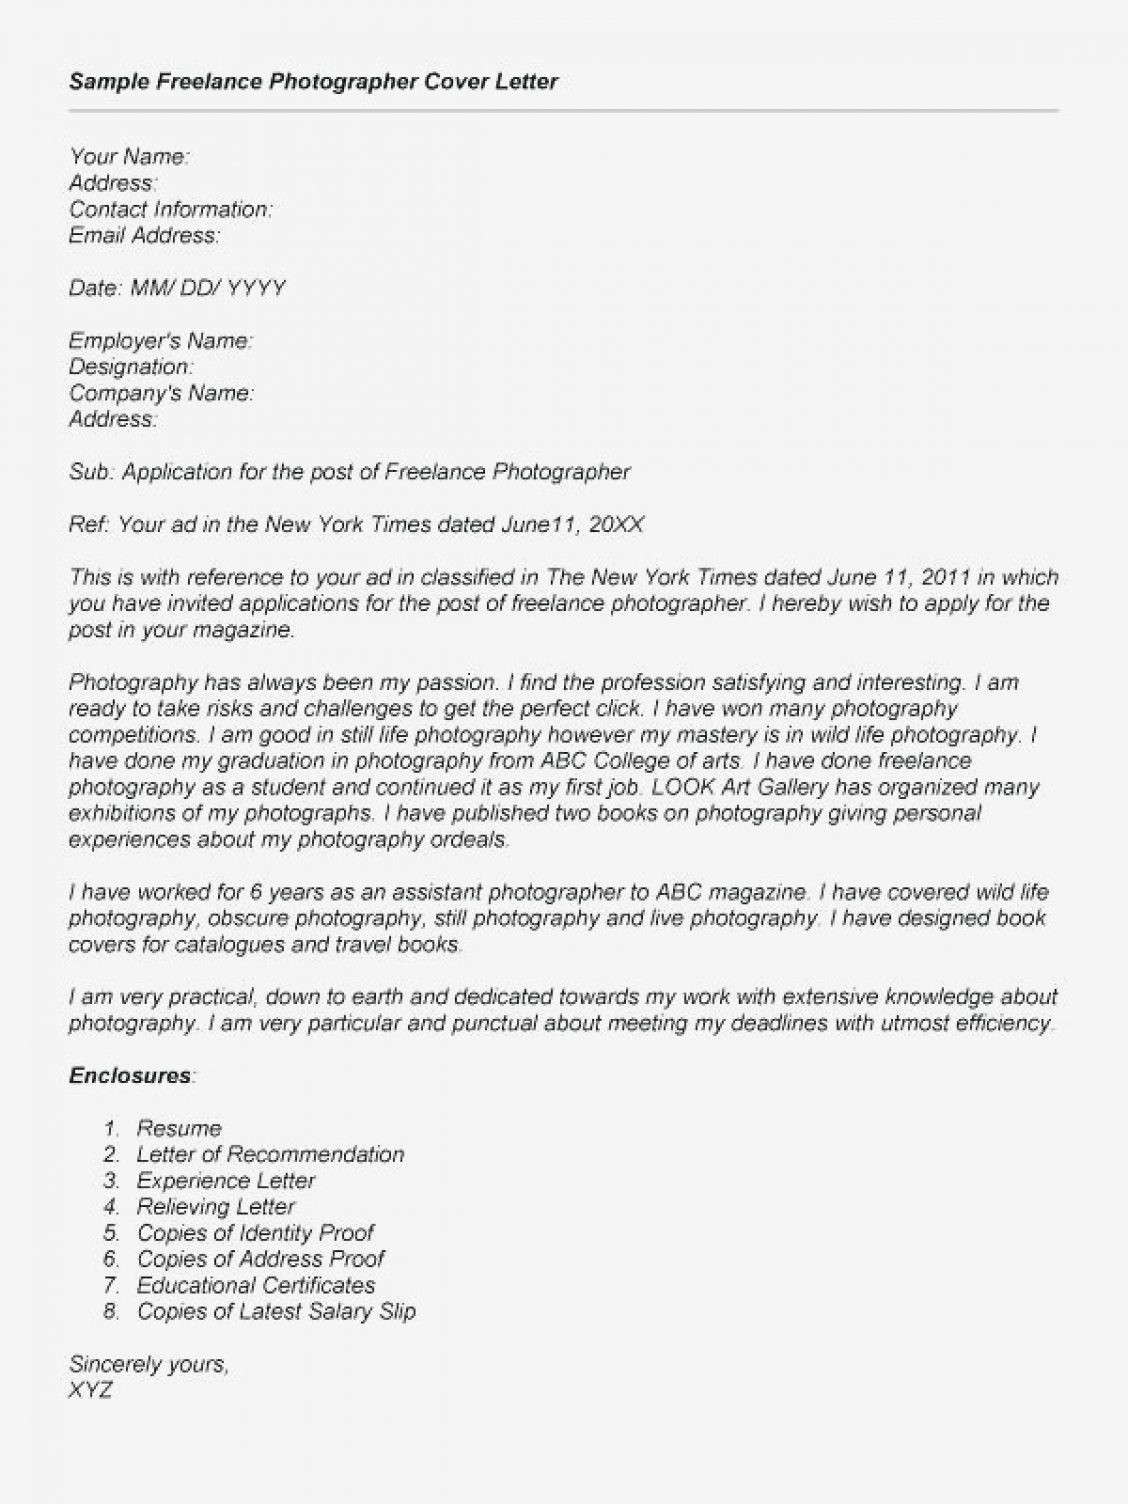 Freelance Writer Cover Letter Sample Best Ideas Of Editor About